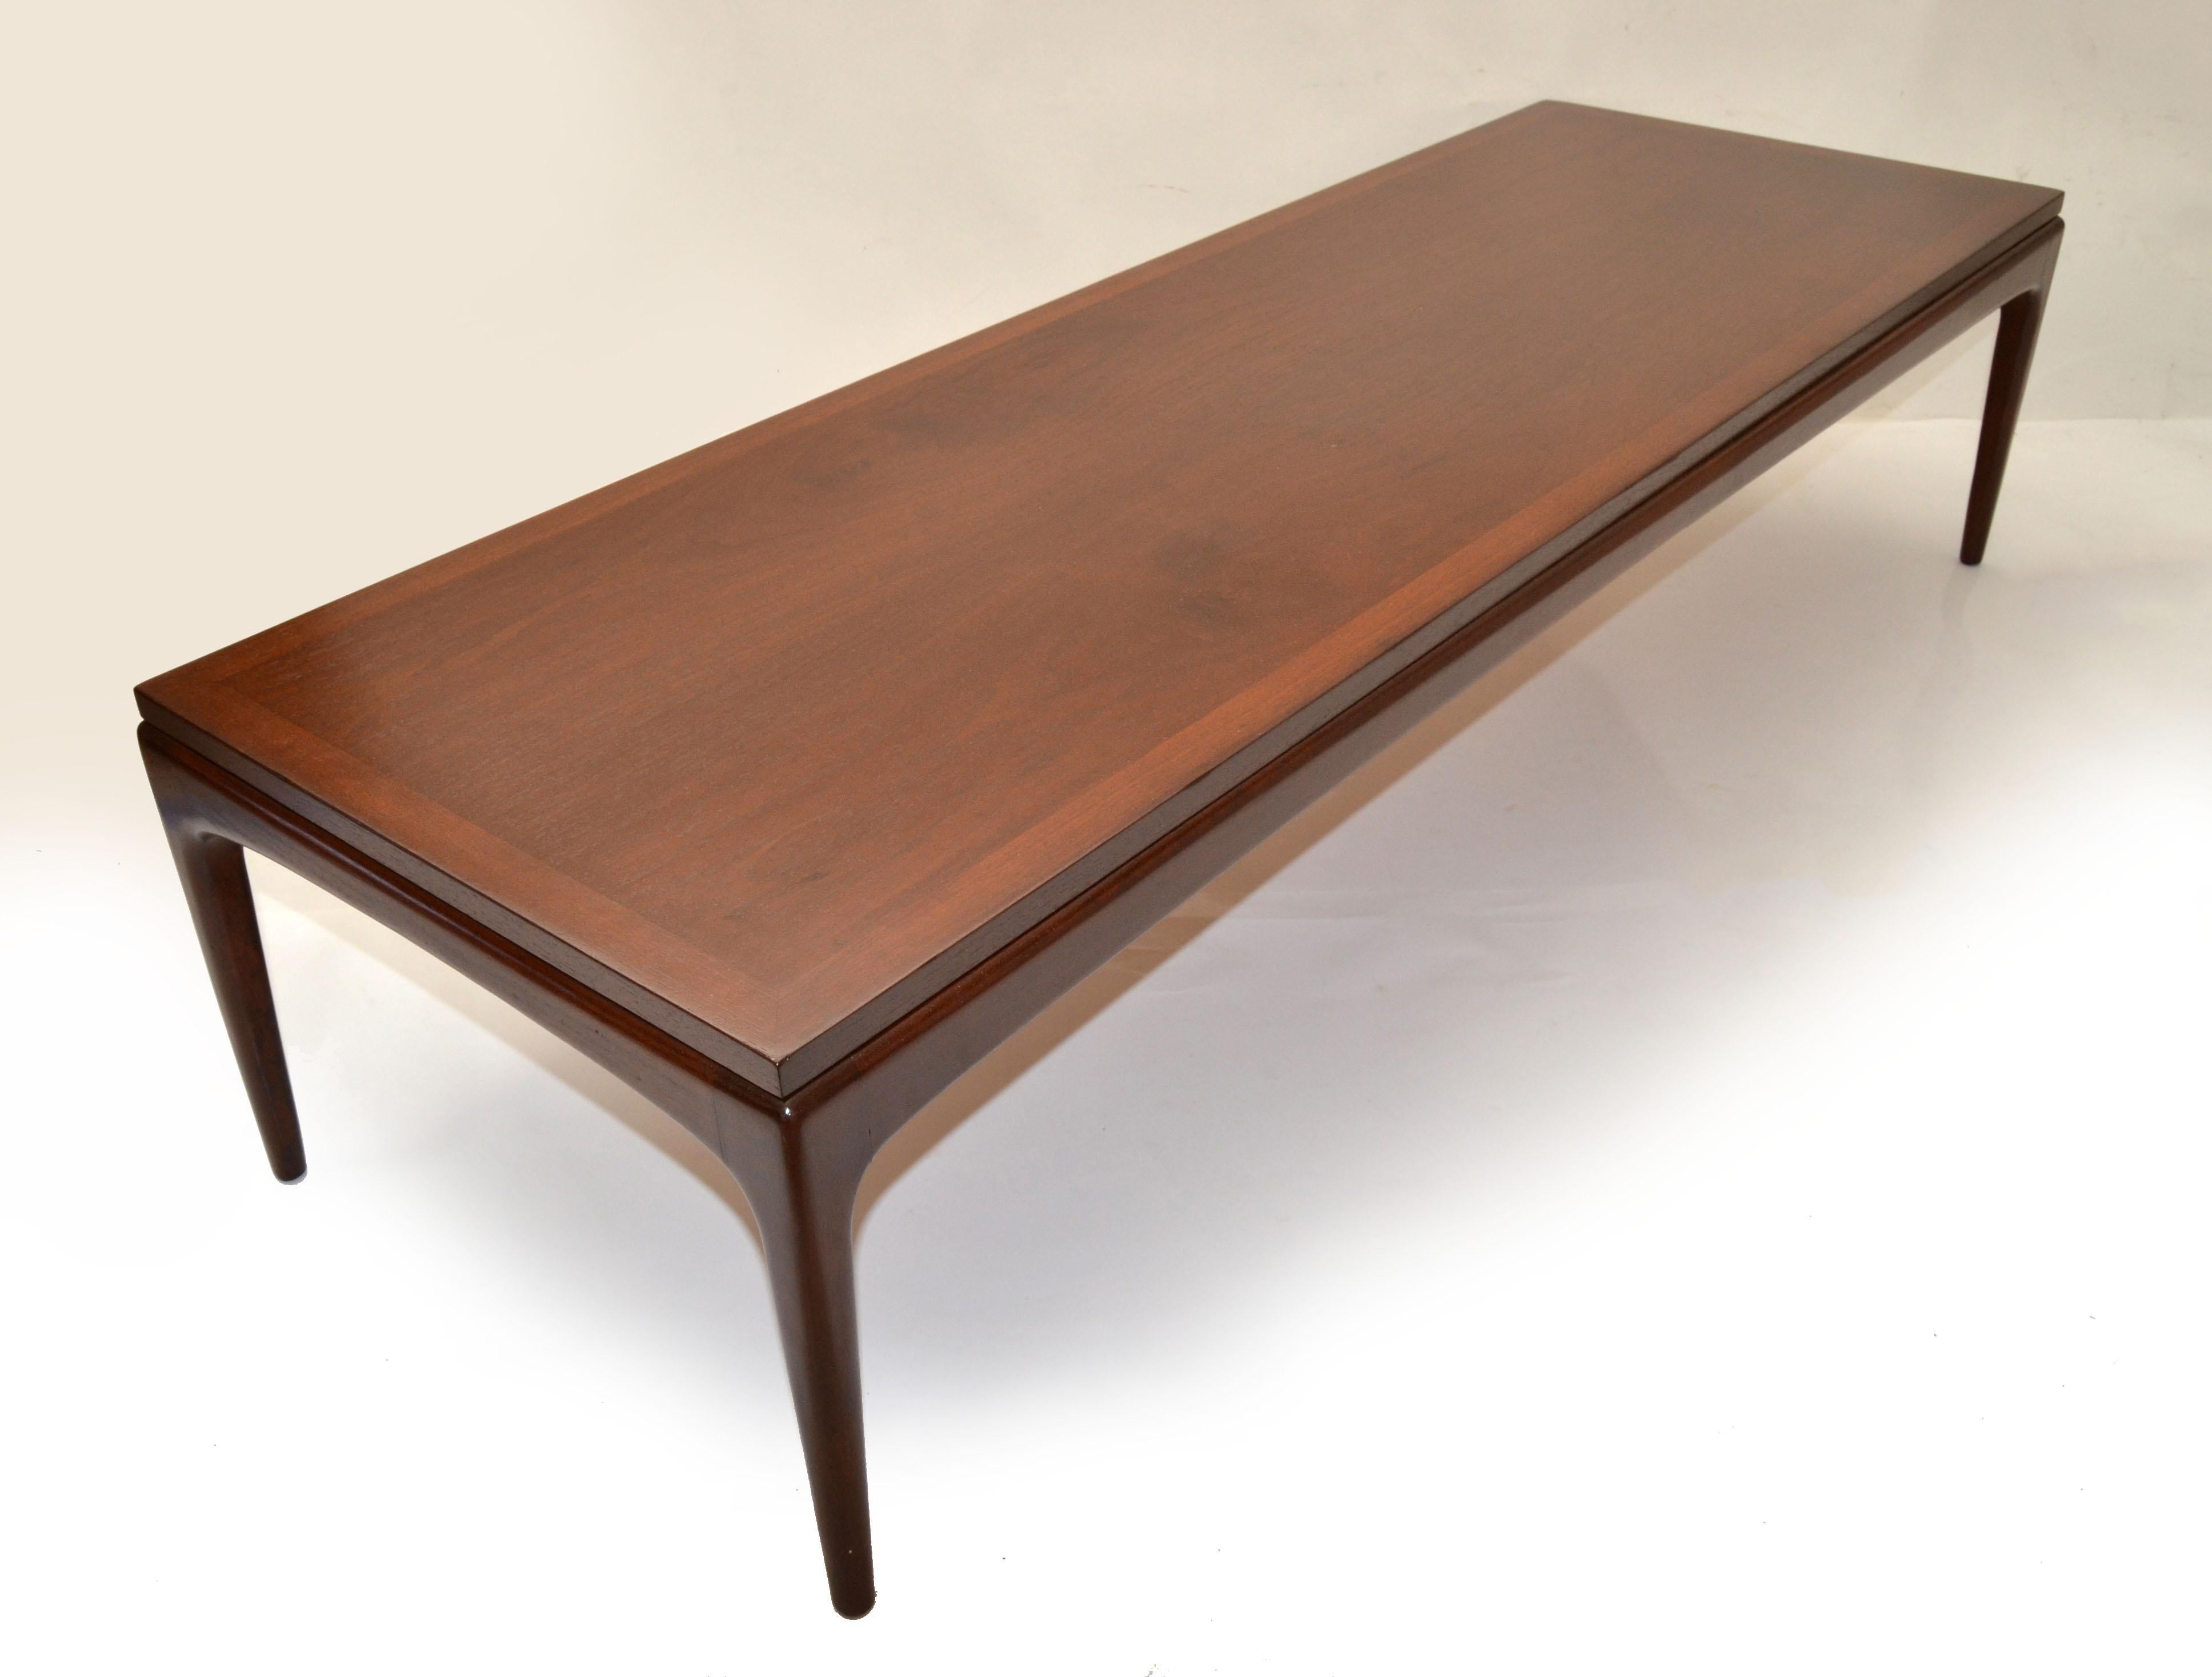 Italian Gio Ponti Style Low Coffee Table Tapered Legs Walnut Mid-Century Modern Italy 70 For Sale